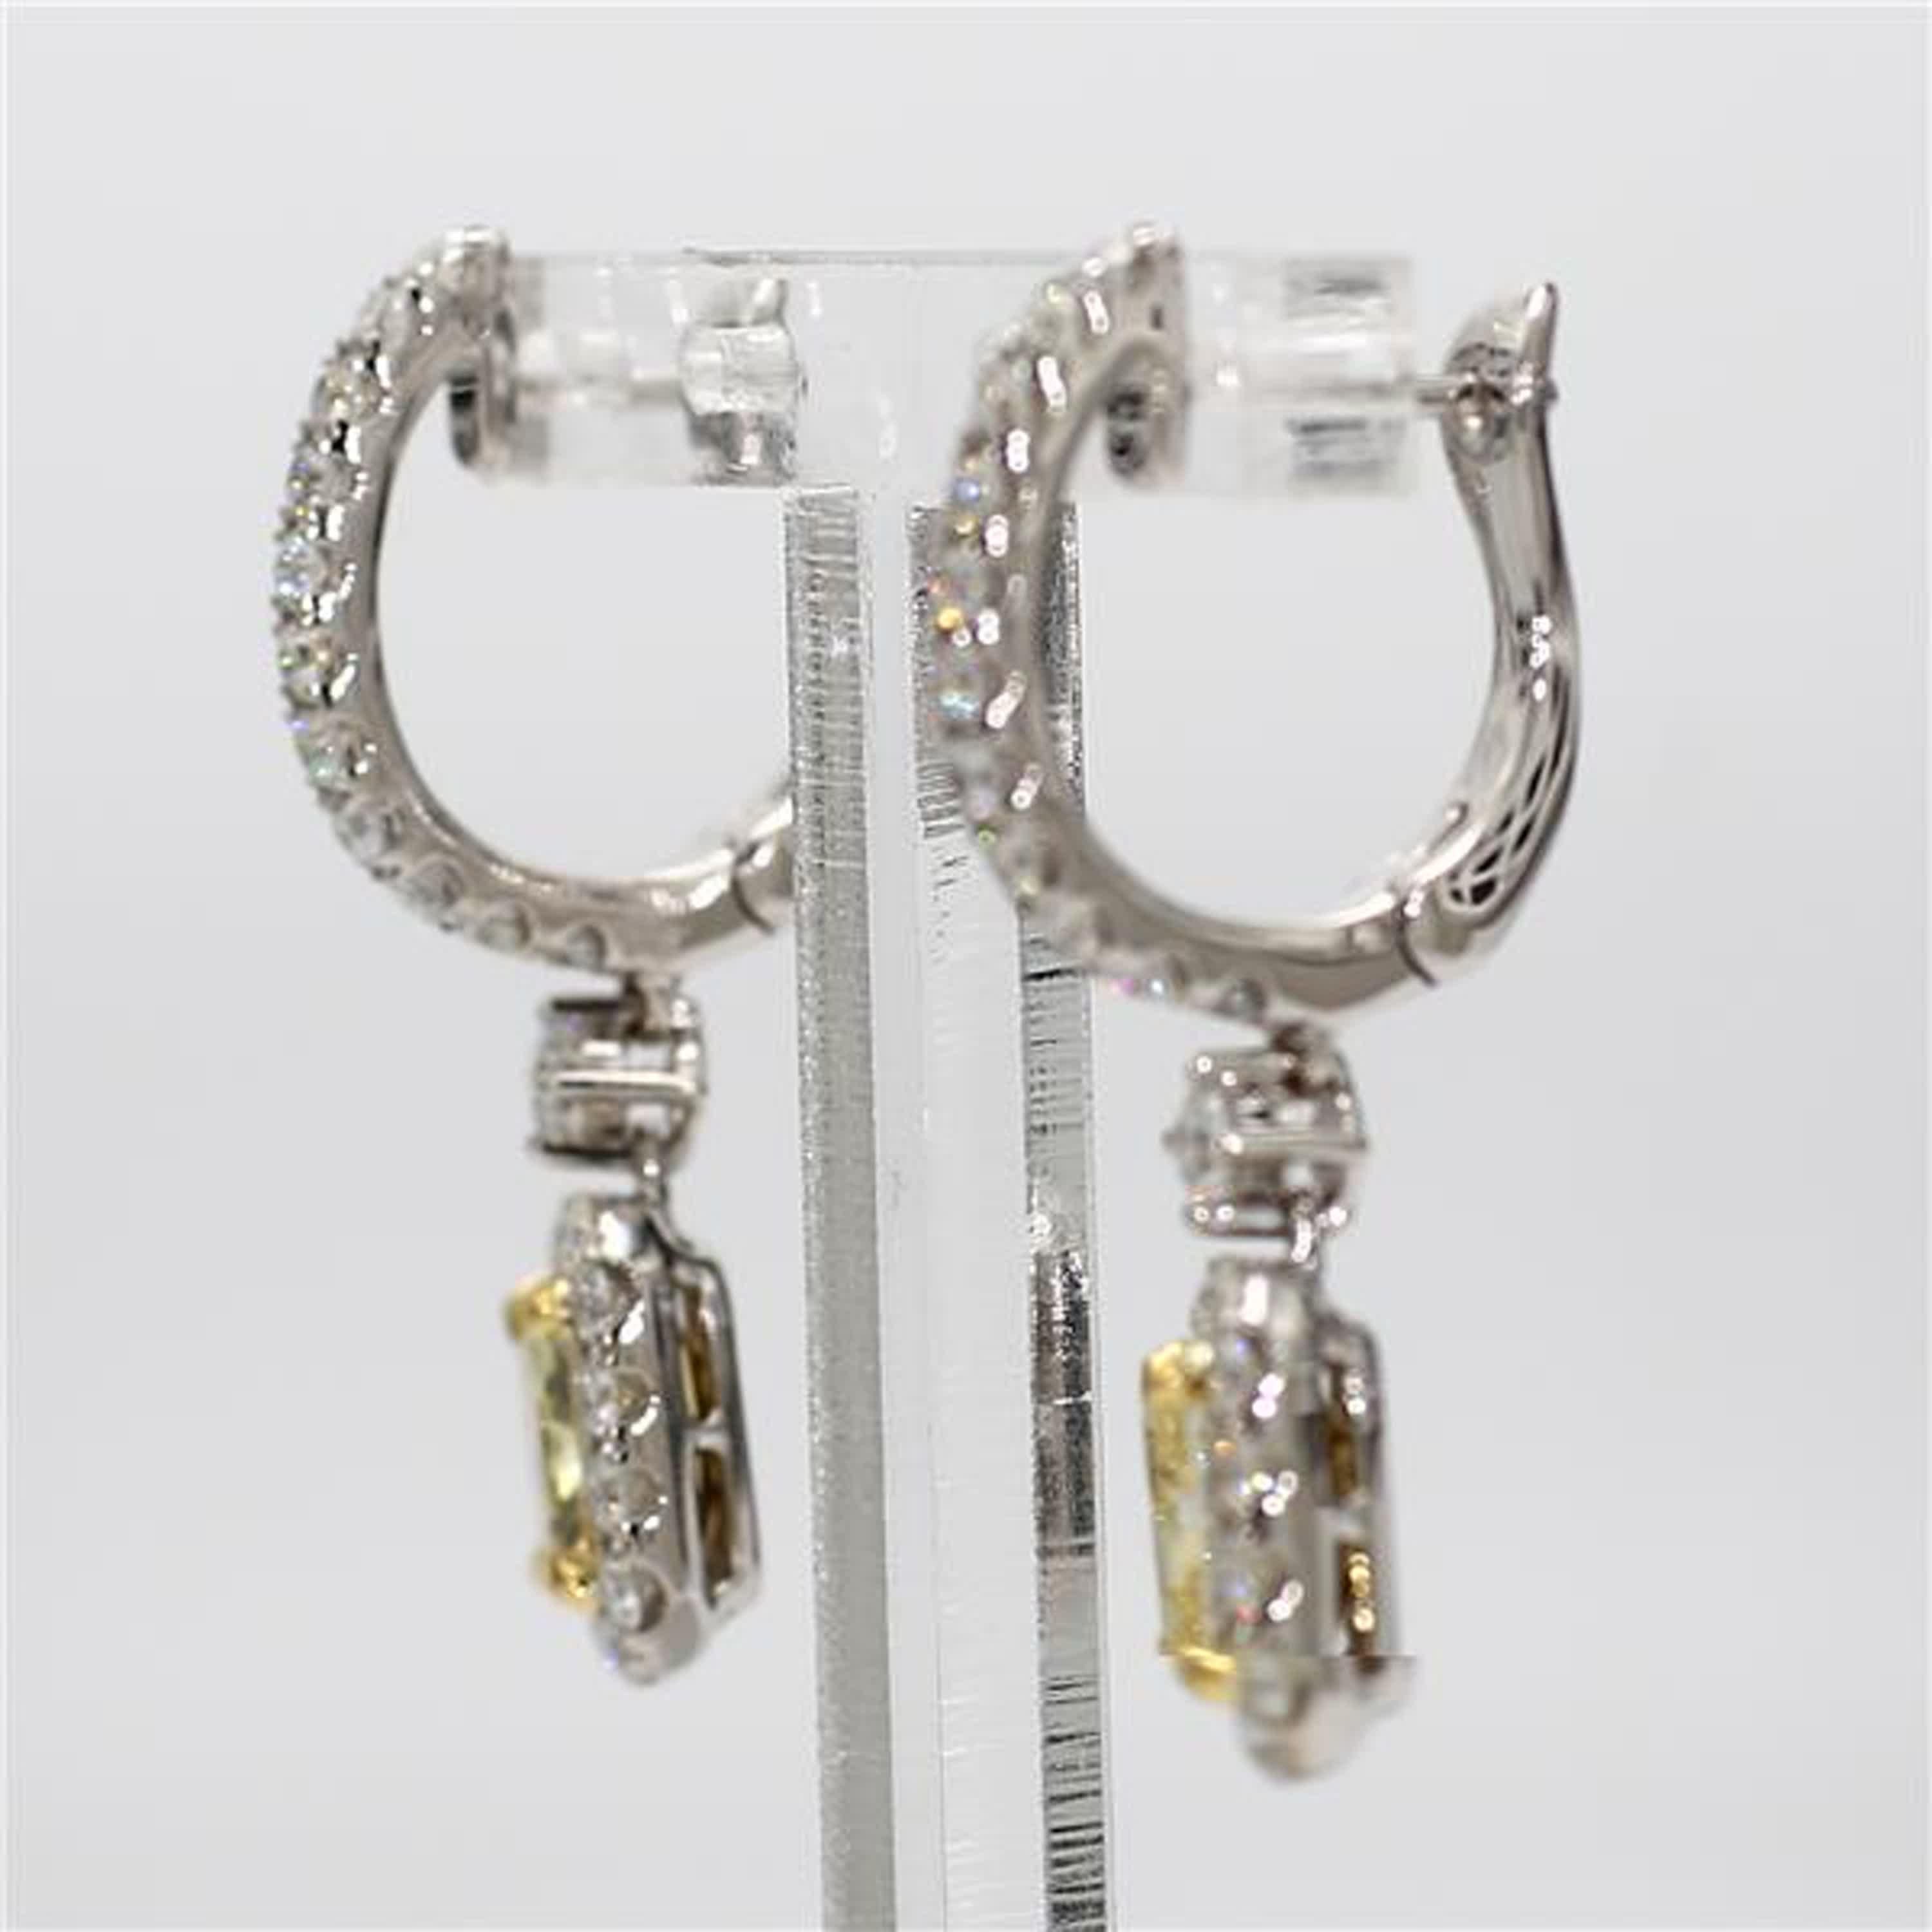 RareGemWorld's classic GIA certified diamond earrings. Mounted in a beautiful 18K Yellow and White Gold setting with natural radiant cut yellow diamonds. The yellow diamonds are surrounded by round natural white diamond melee. These earrings are